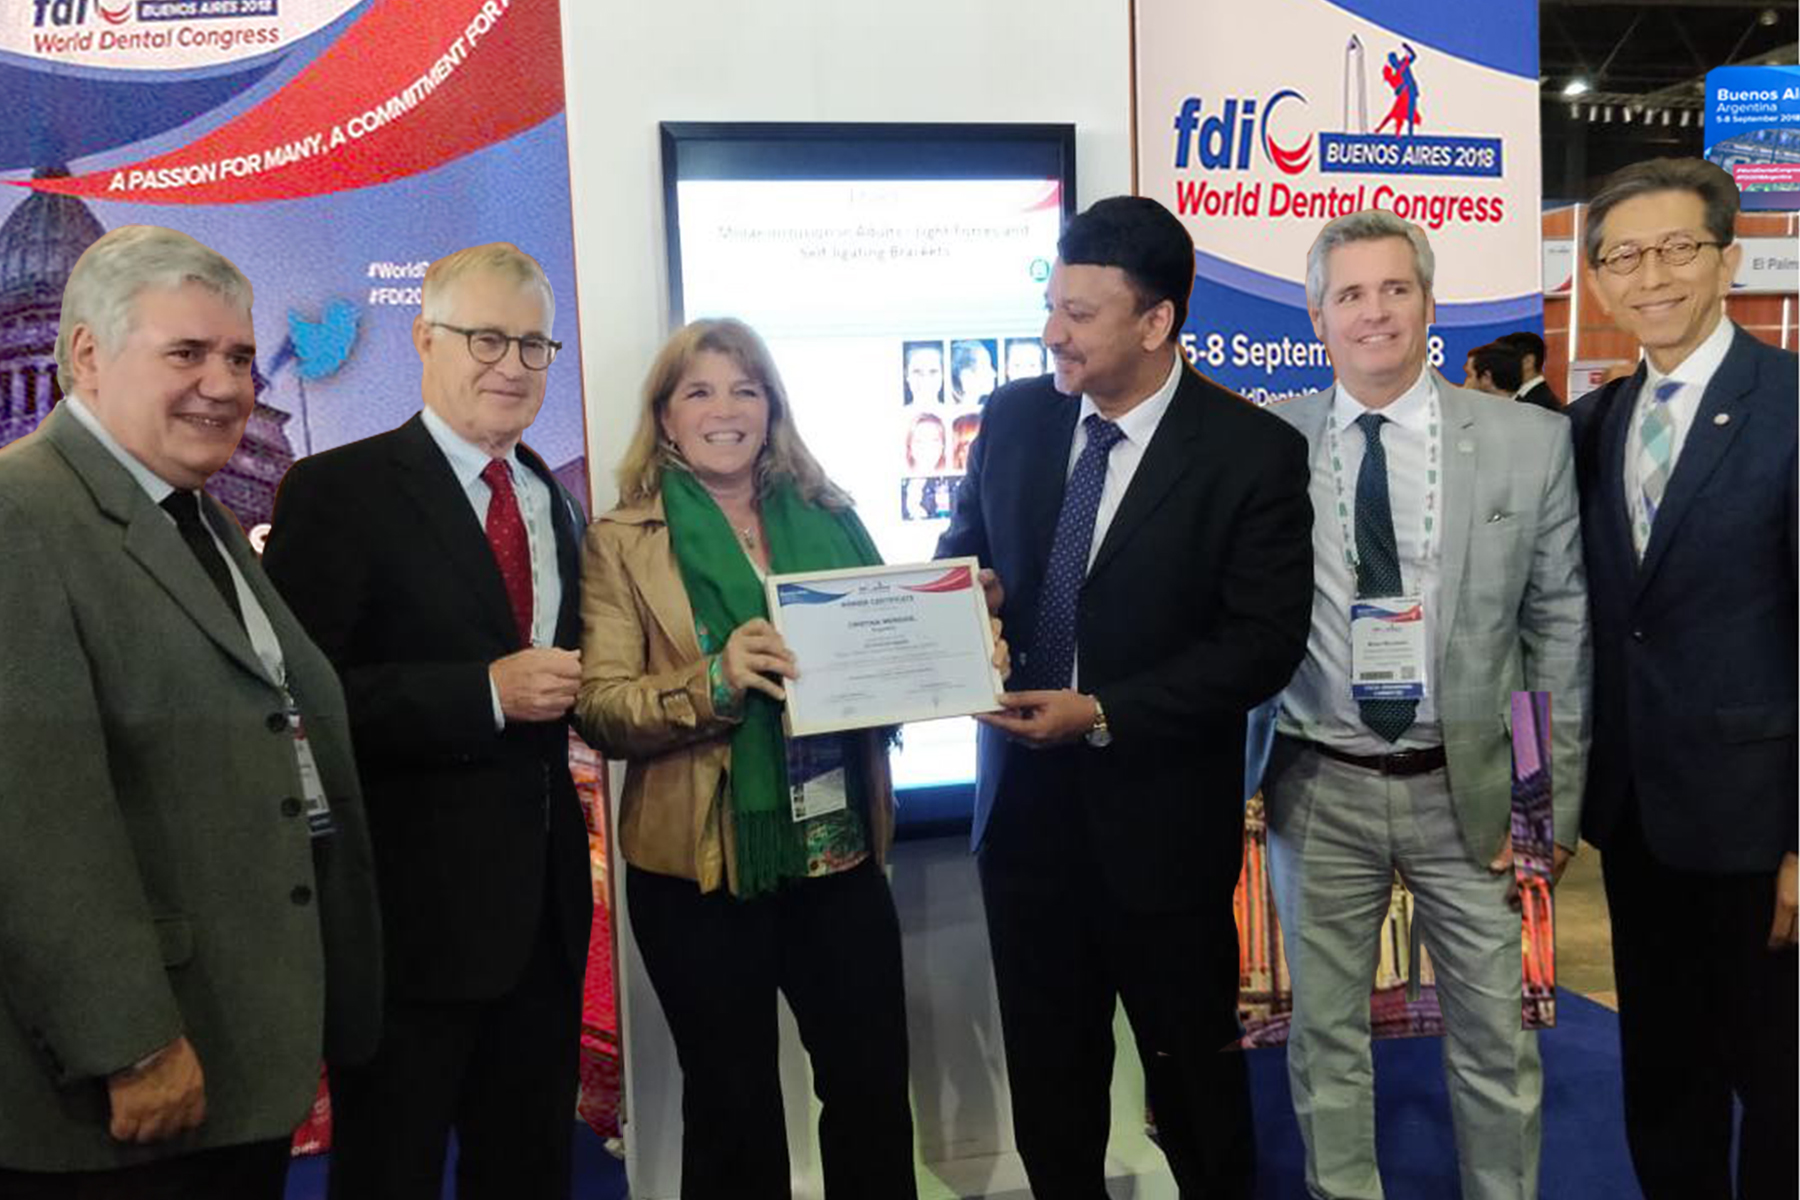 Dr Sm Balaji Hands A Certificate Of Excellence To A Winner. Also Seen Are Dr. Jurgen Fedderwitz, Chair, Education Committee, Fdi, Dr. Guillermo Rivero, Congress President, Dr William Cheung, Member, Education Committee And Dr Brian Murdoch, Member, Scientific Committee